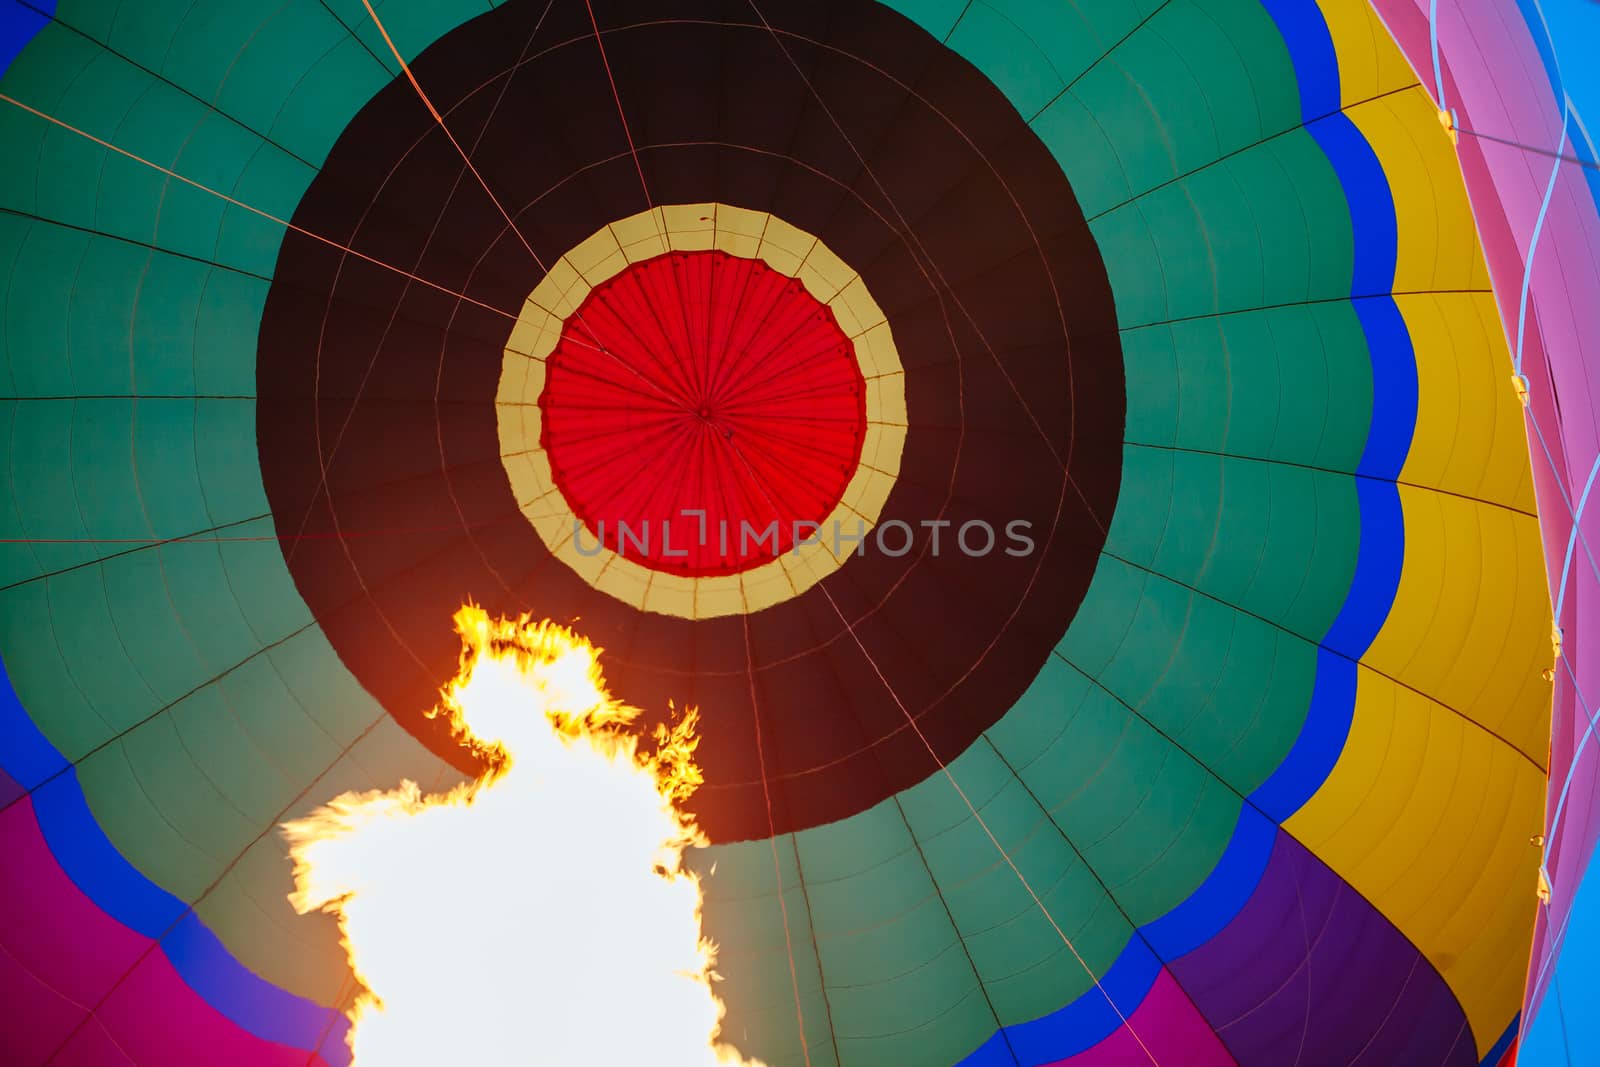 A blast of gas ignites, filling a hot air balloon with warm air on a cold winter's morning in Yarra Valley, Victoria, Australia